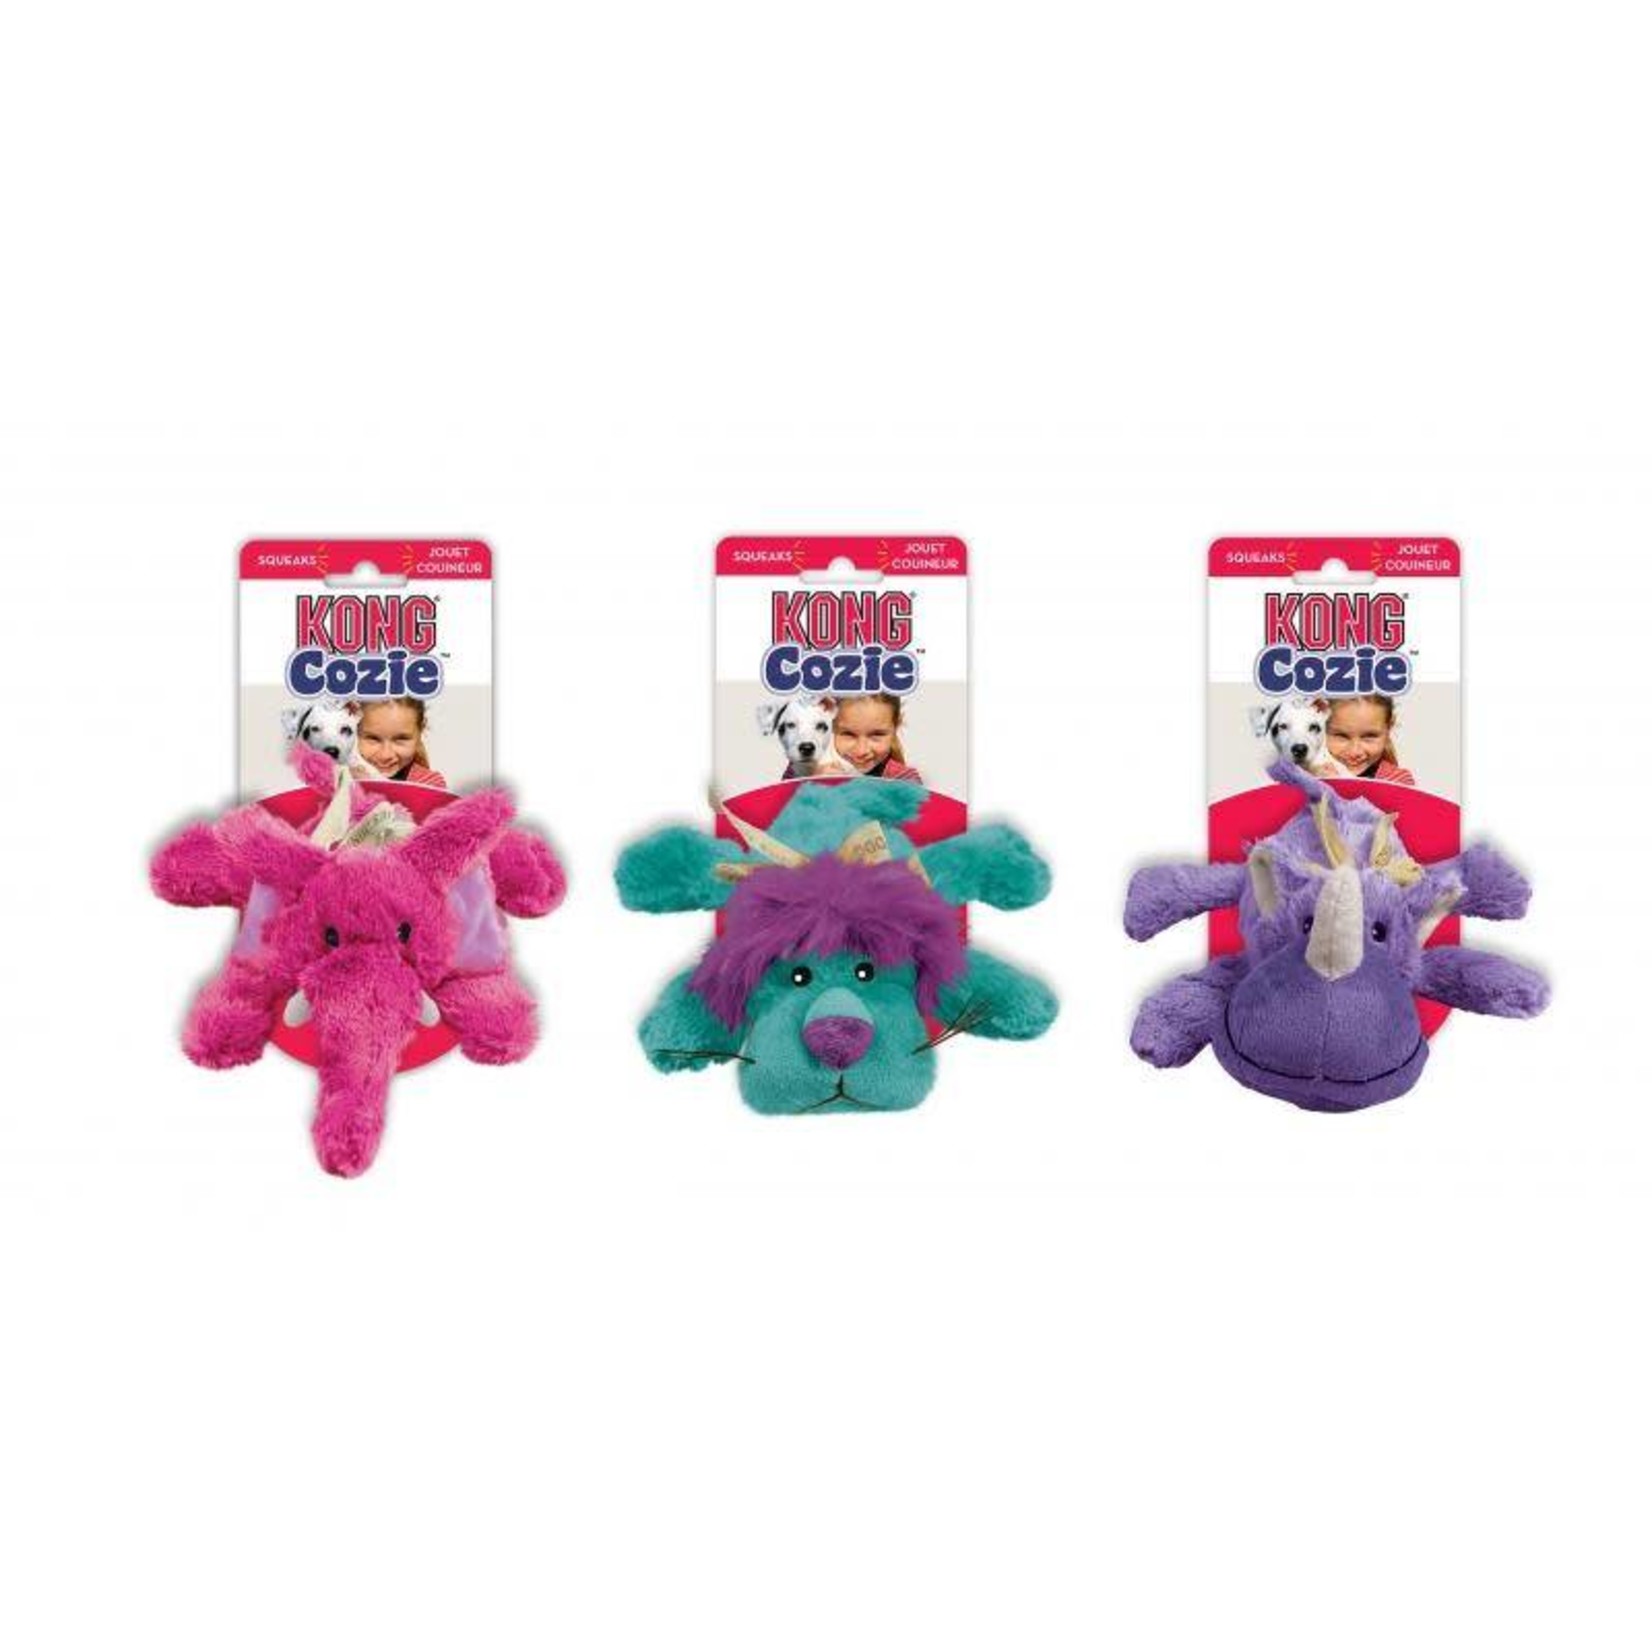 KONG Cozies Brights Toys